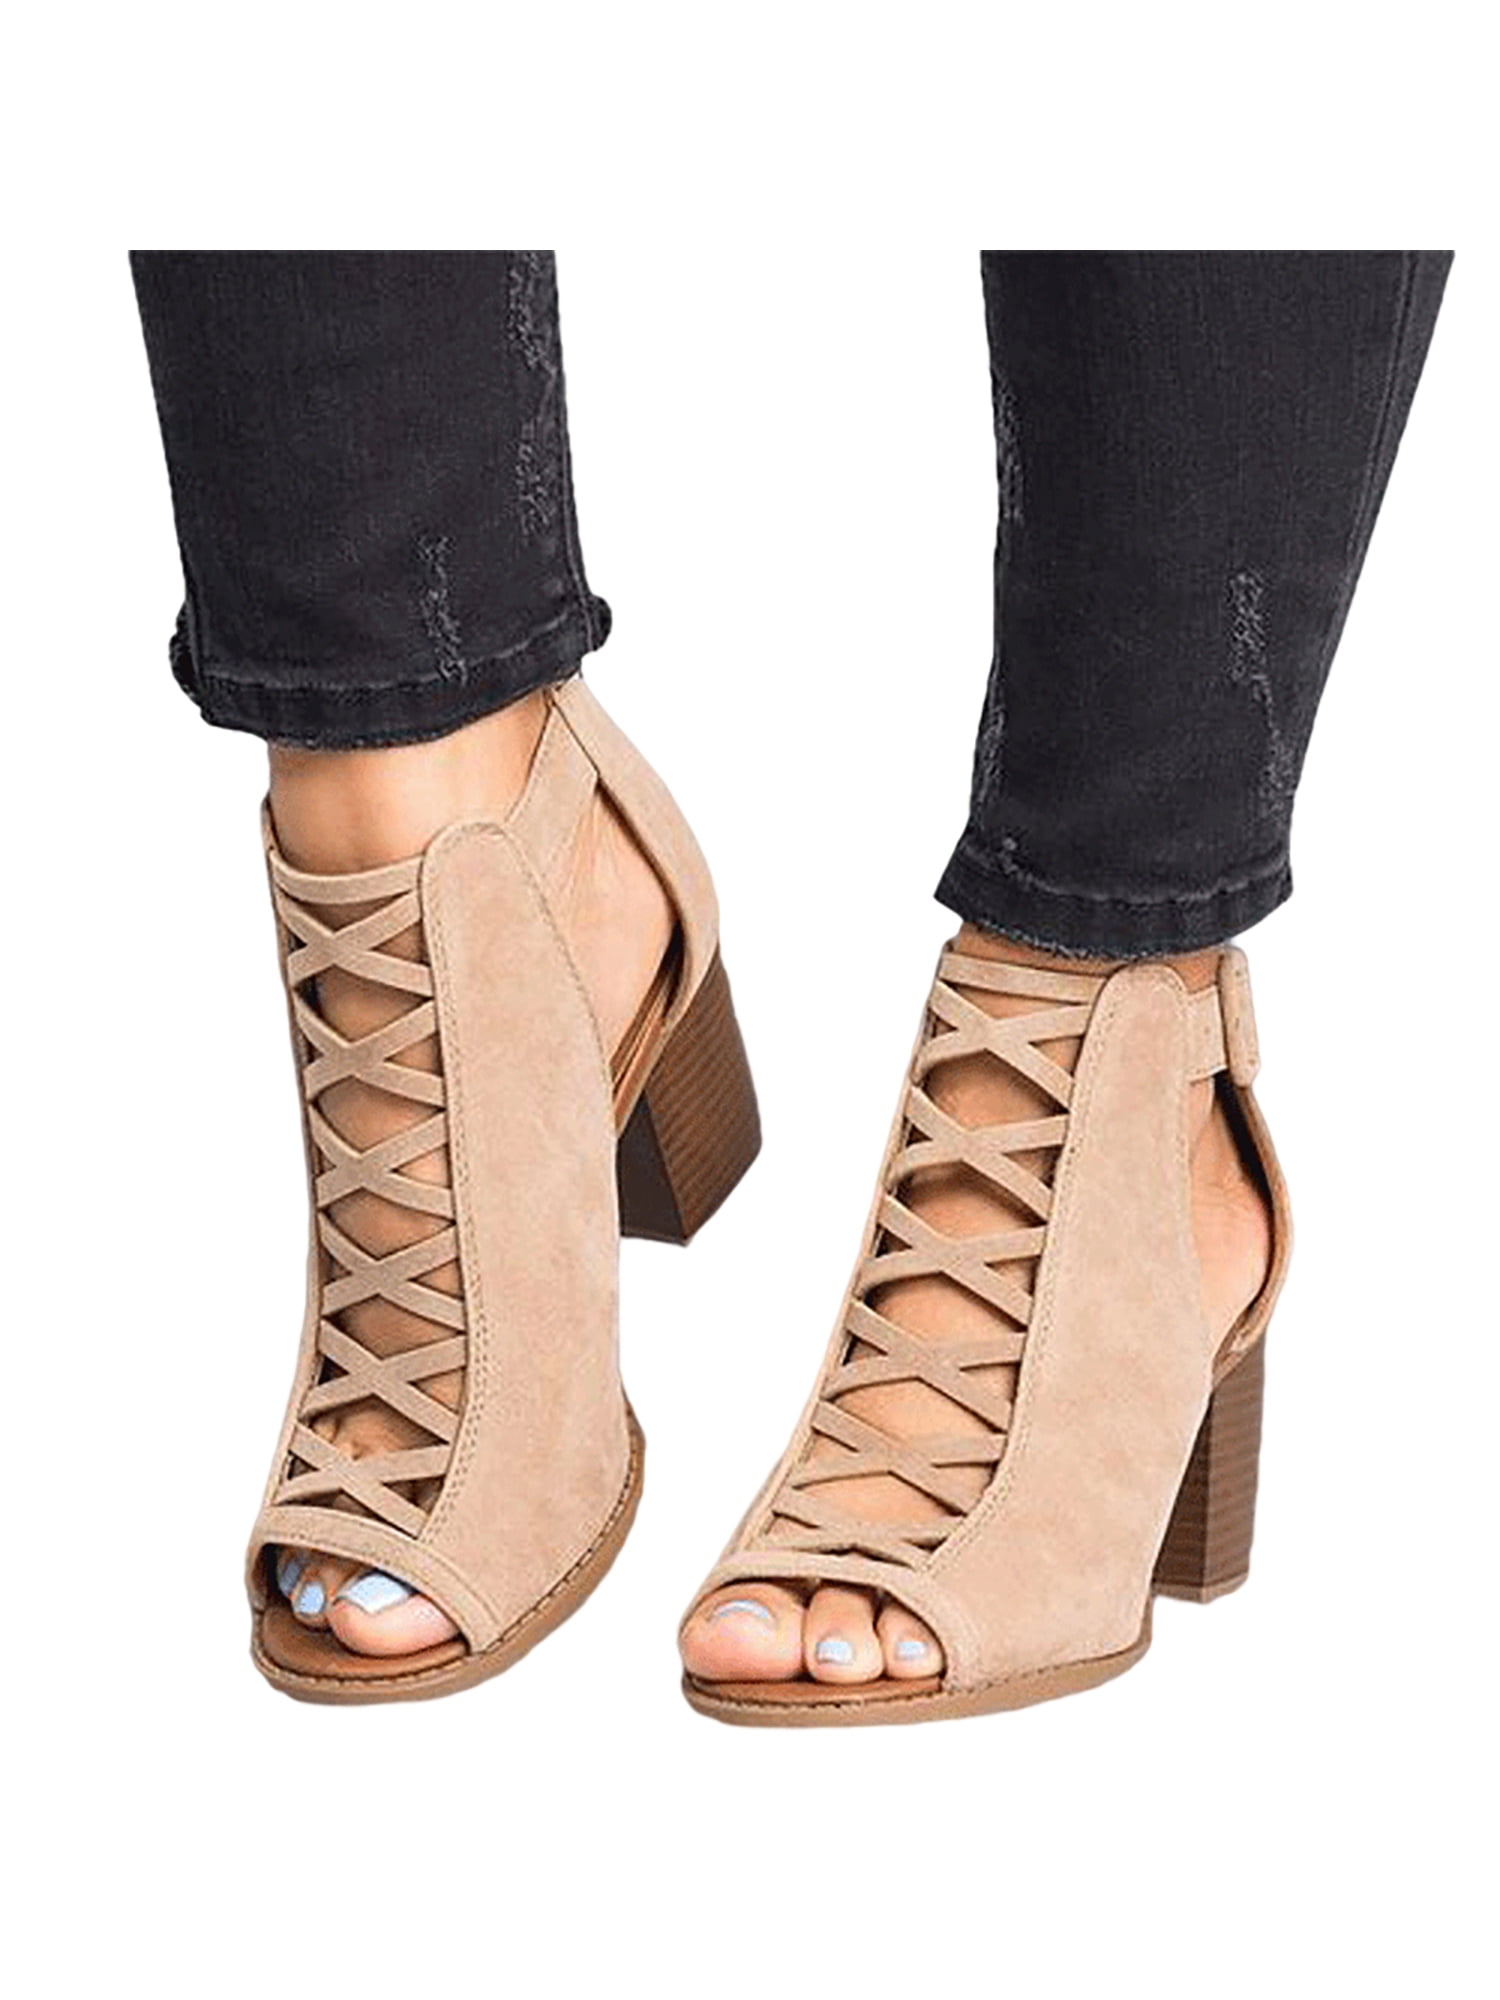 Women Gladiator Pointed Toe Lace Up Zip Ankle Boots Solid High Heels Shoes Size 